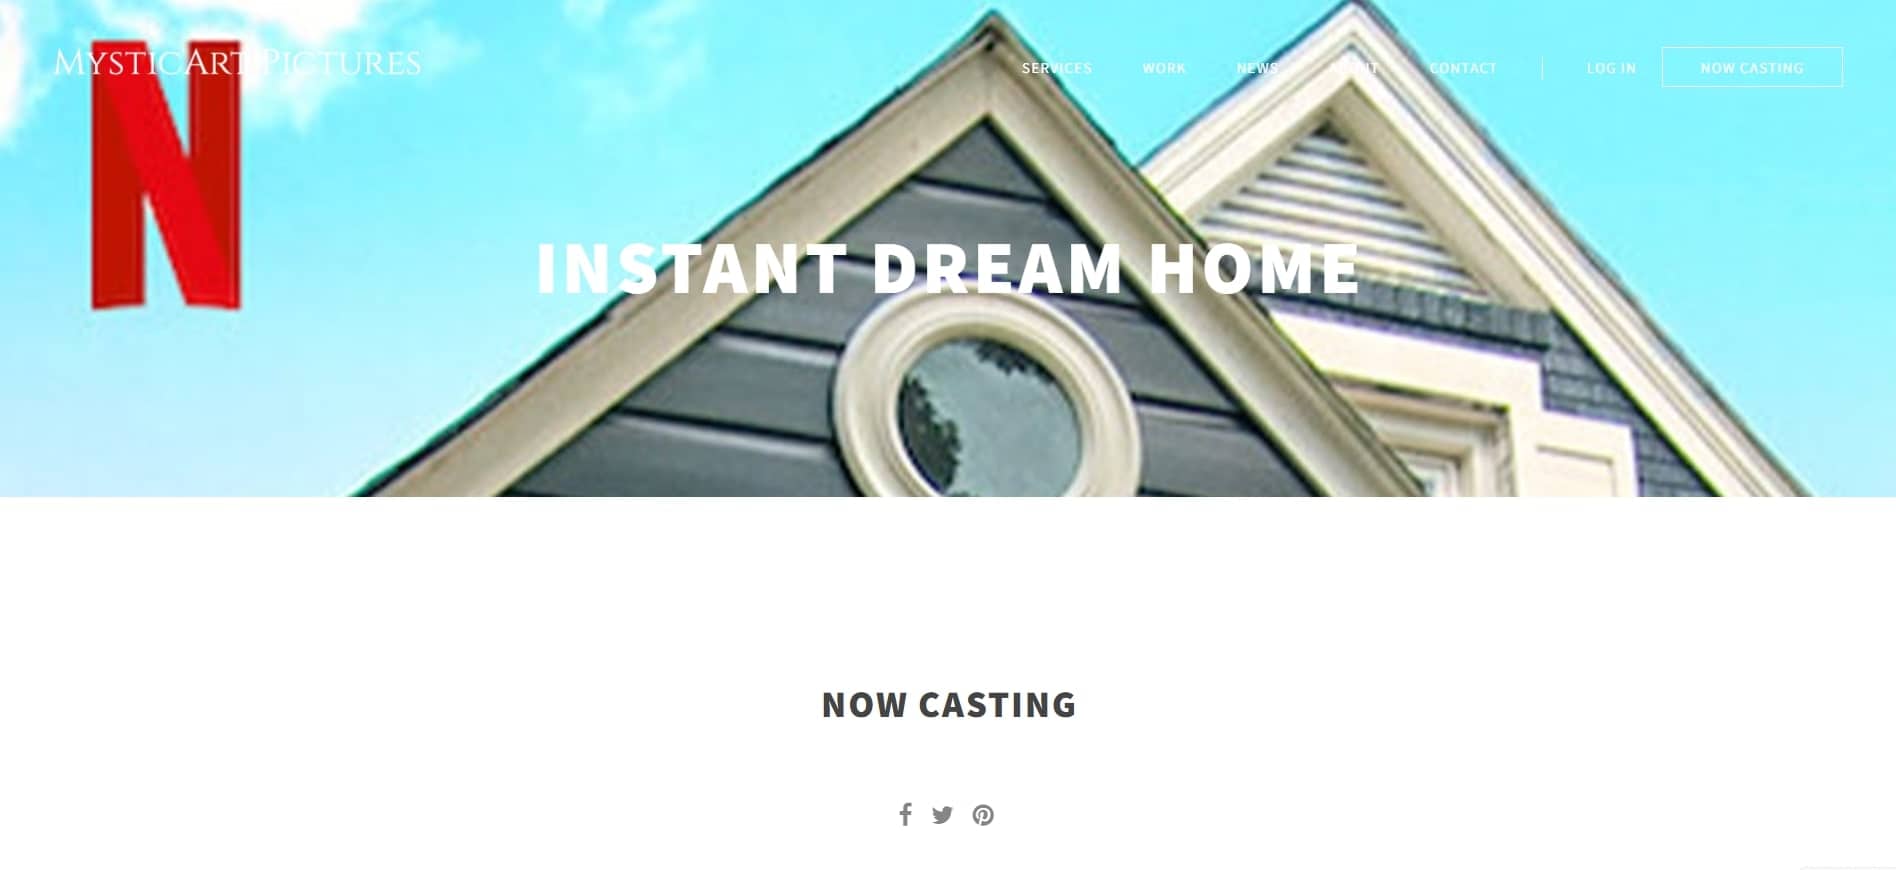 Image of the Instant Dream Home casting application site